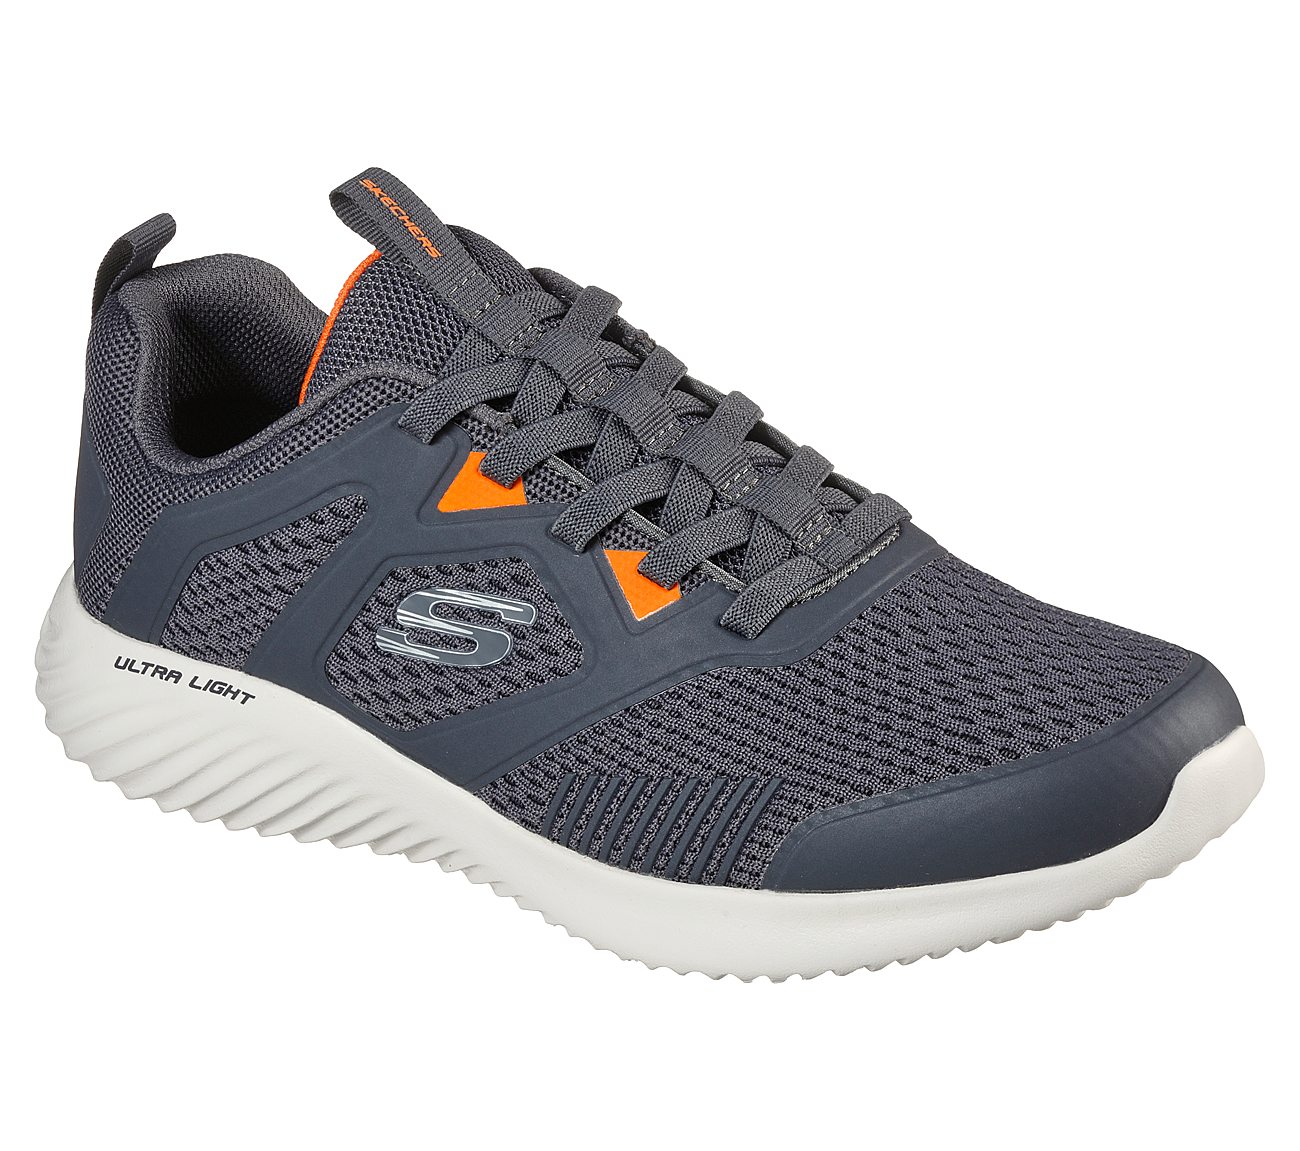 BOUNDER-HIGH DEGREE, CHARCOAL/ORANGE Footwear Lateral View